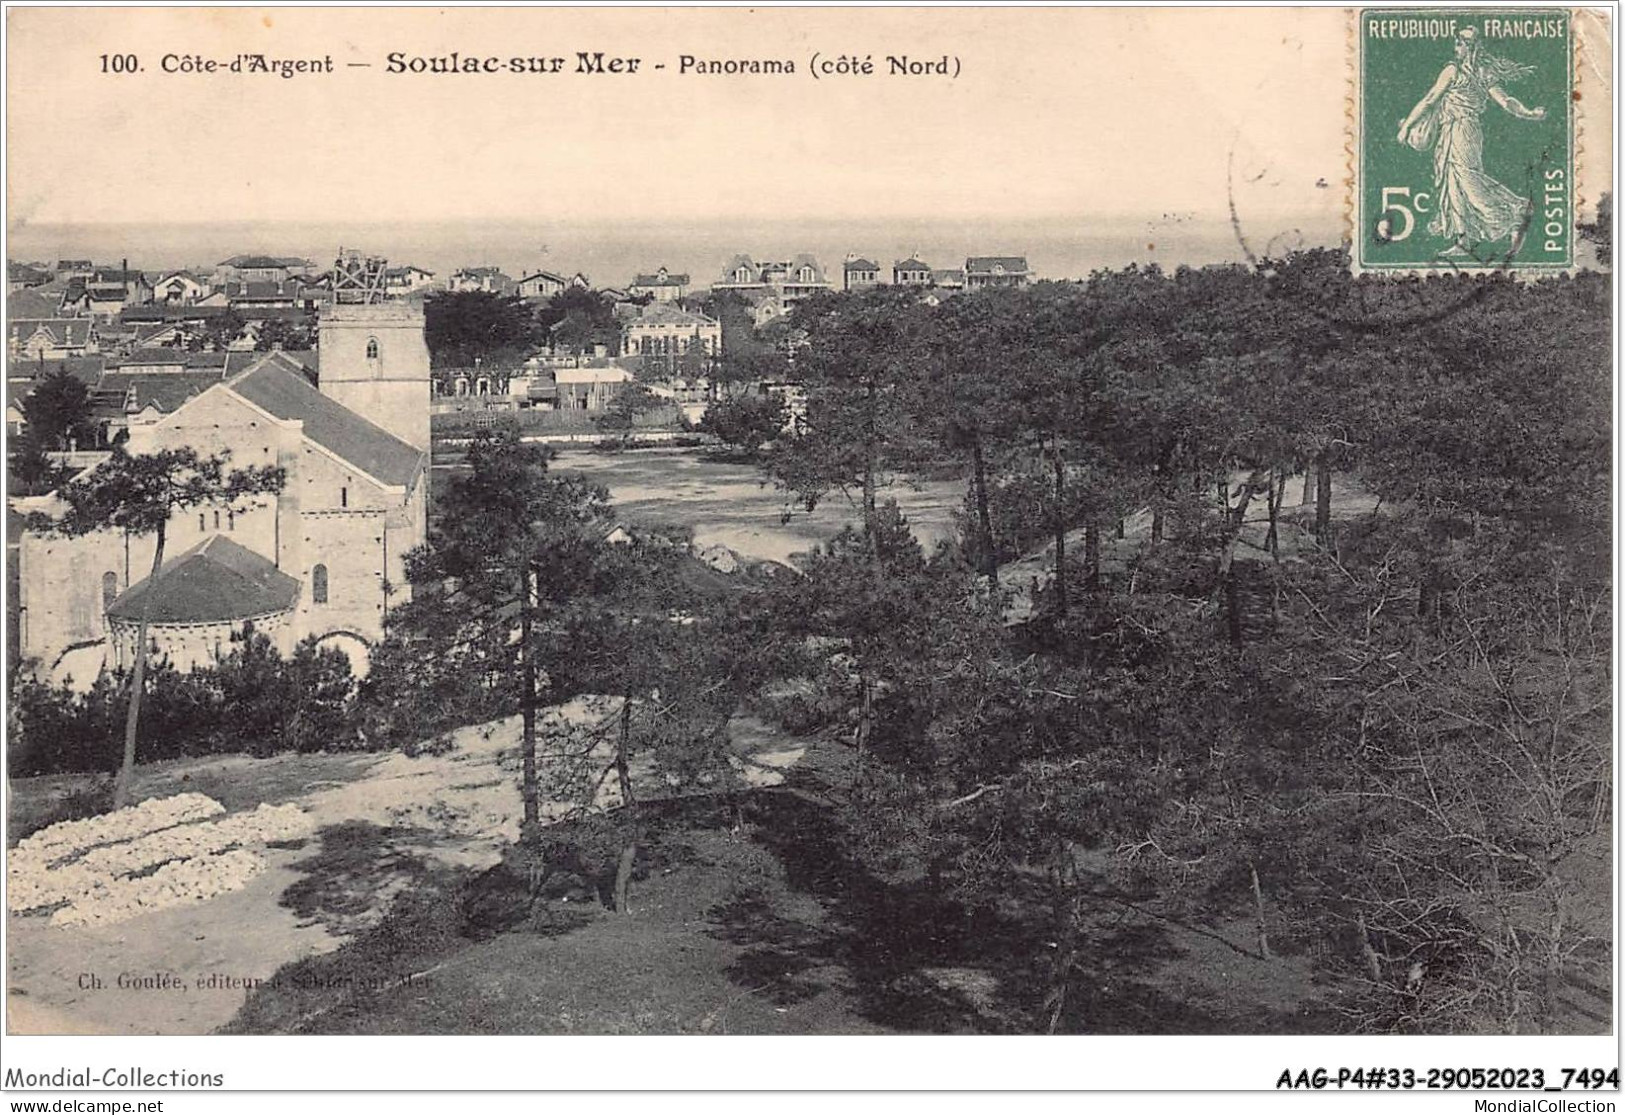 AAGP4-33-0336- SOULAC-SUR-MER - Panorama - Soulac-sur-Mer